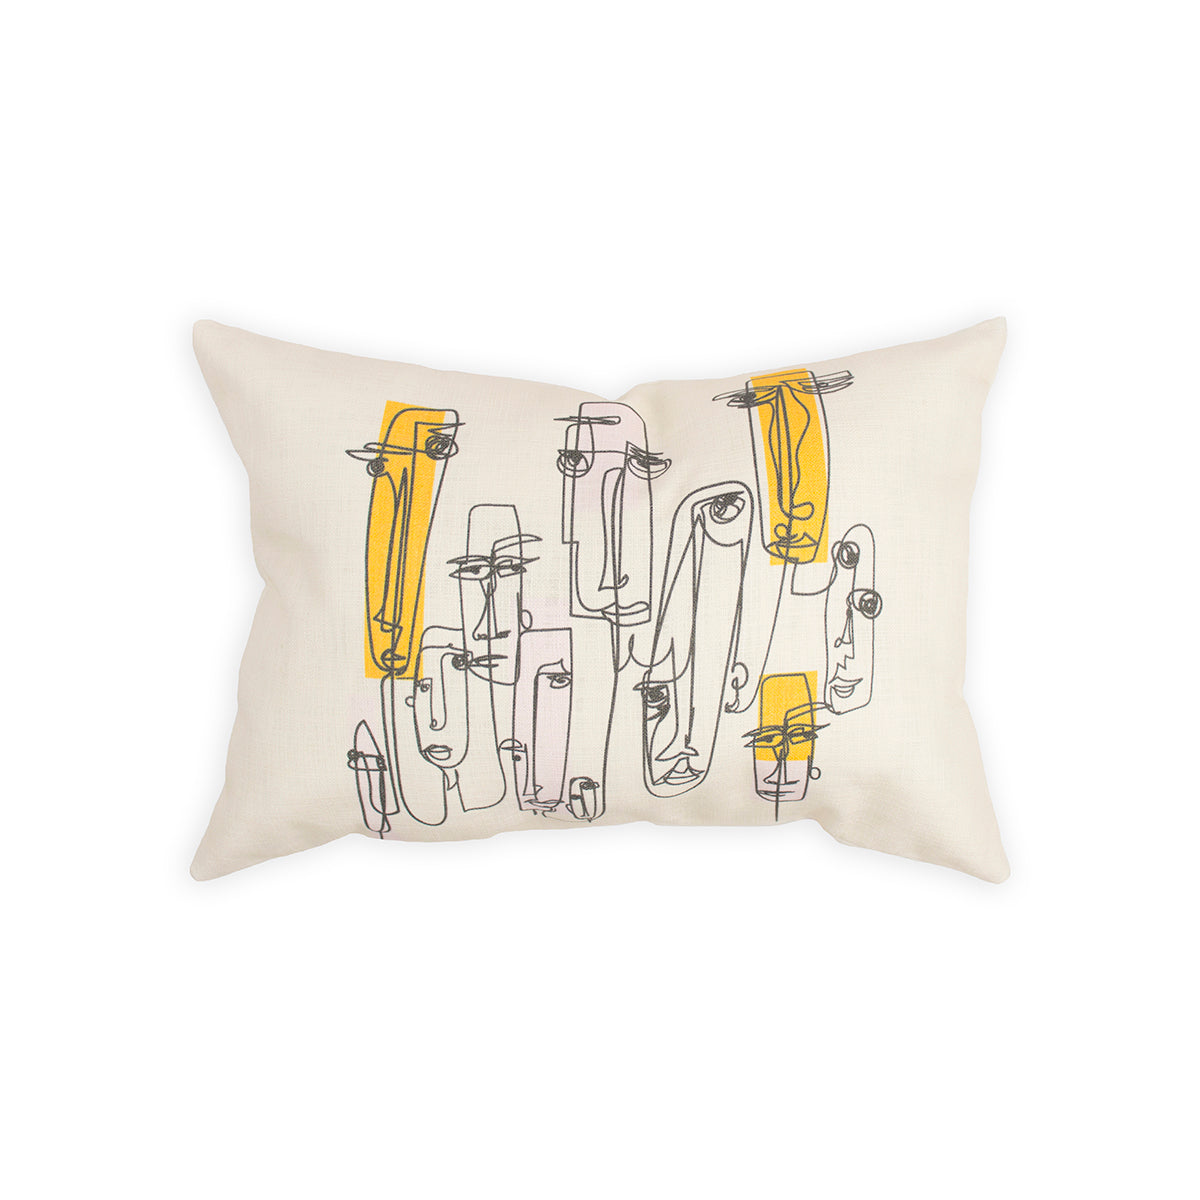 14" x 20" 100% cotton pillow cover featuring abstract face line art with yellow highlighted areas